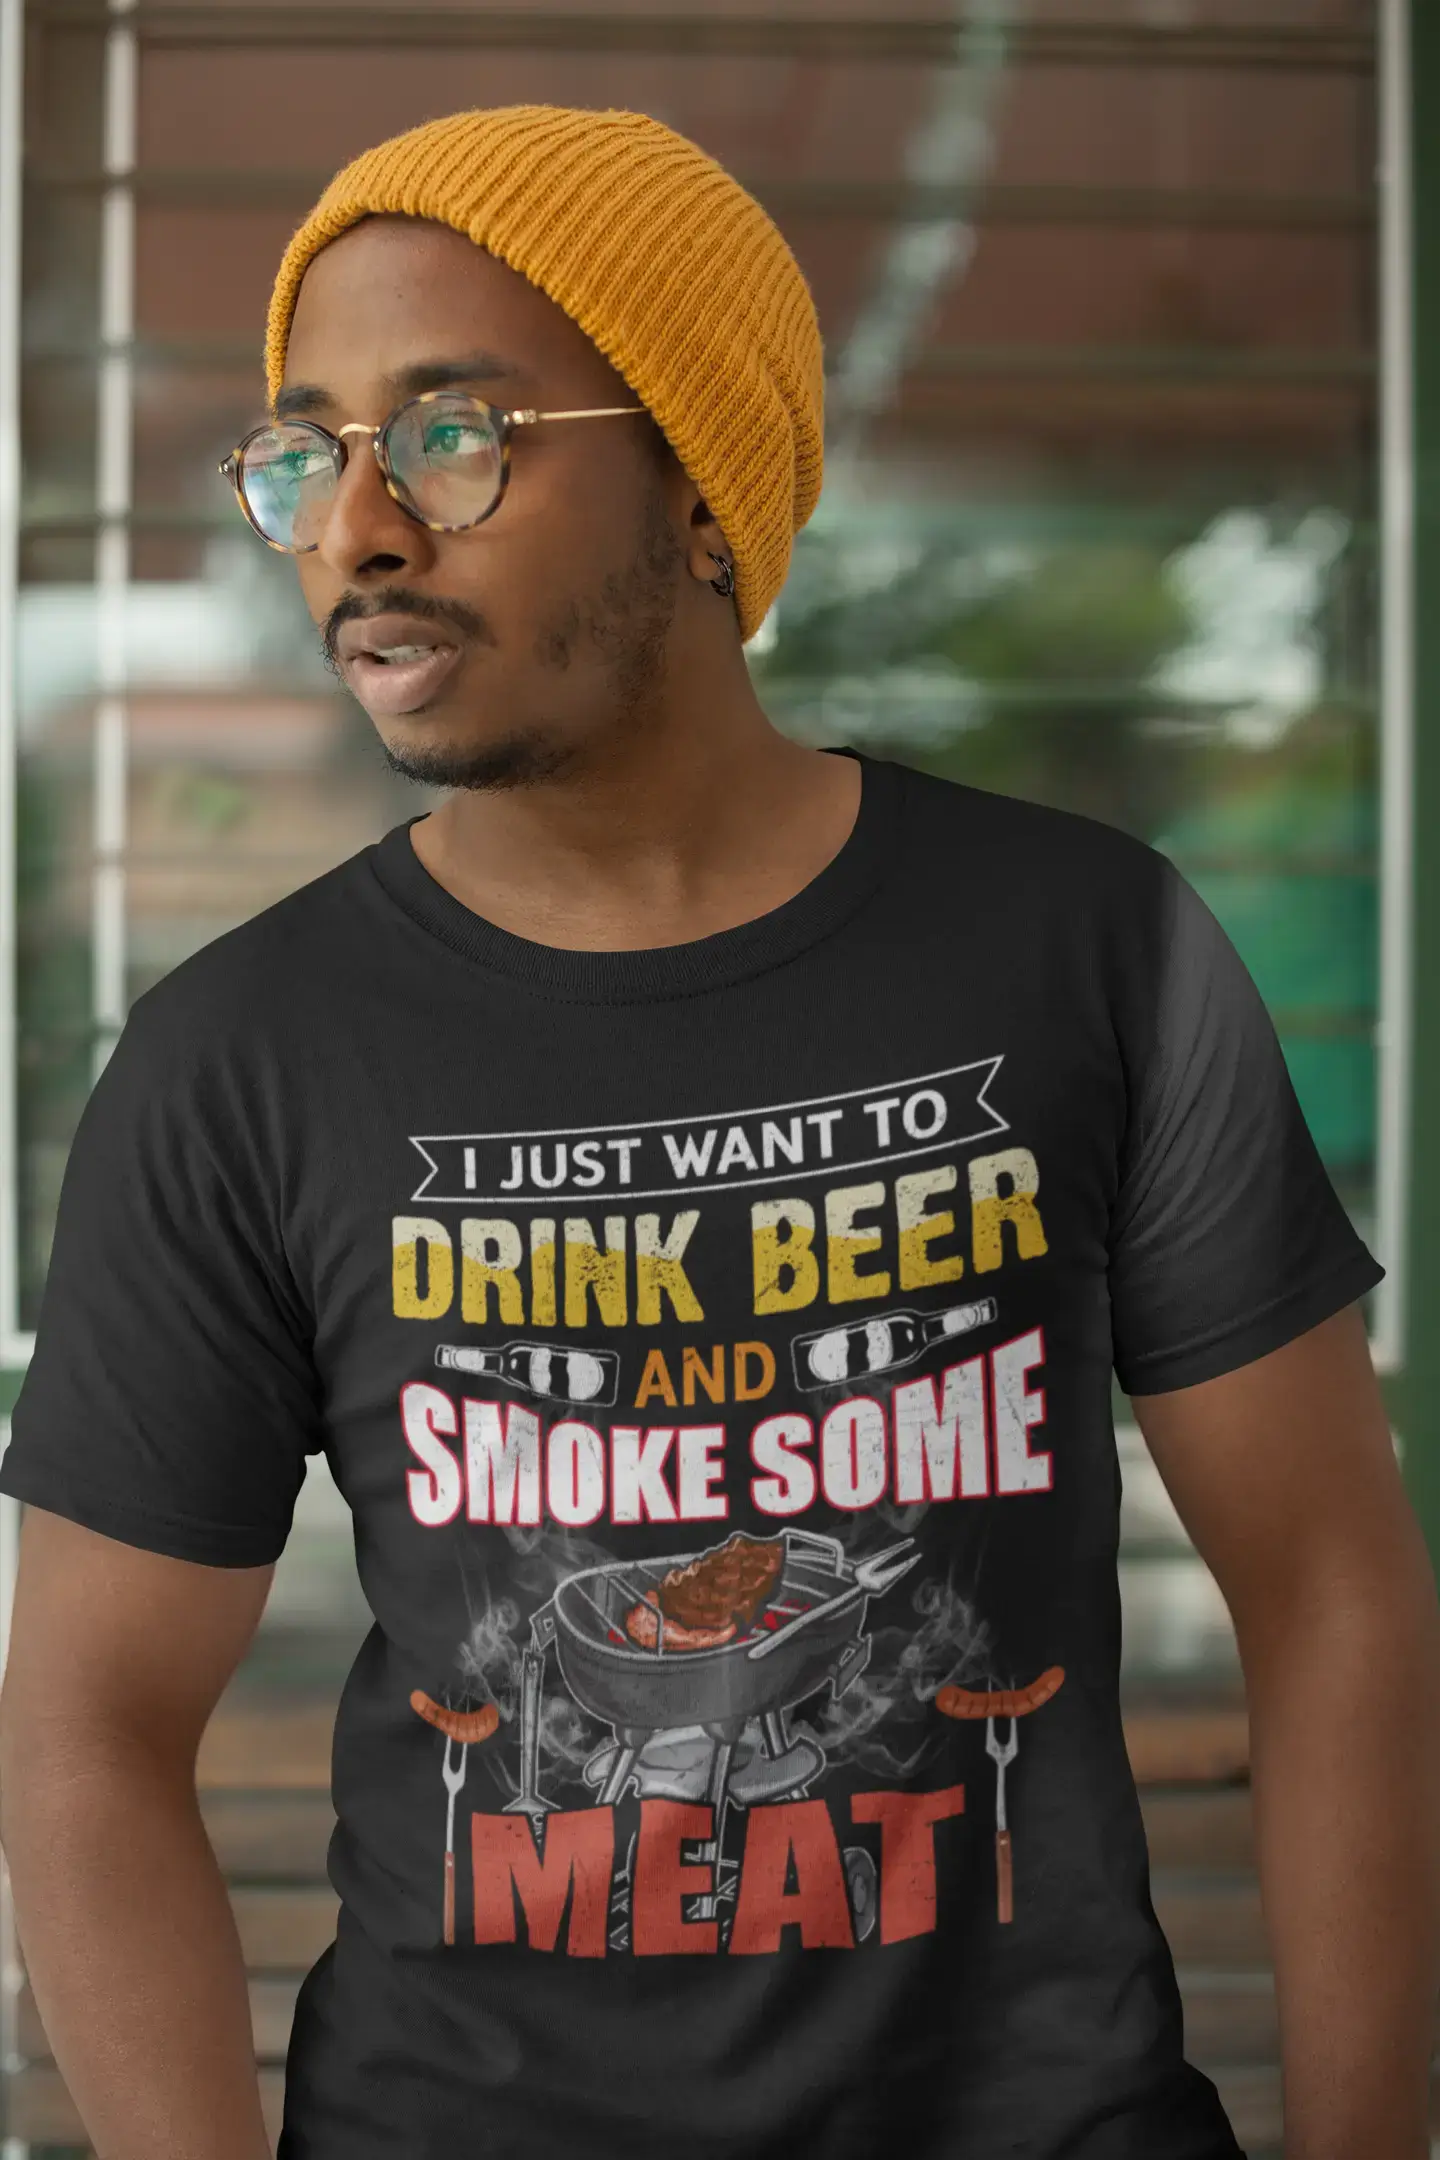 ULTRABASIC Herren-T-Shirt „I Just Want to Drink Beer and Smoke Some Meat“ – Bierliebhaber-Griller-BBQ-T-Shirt